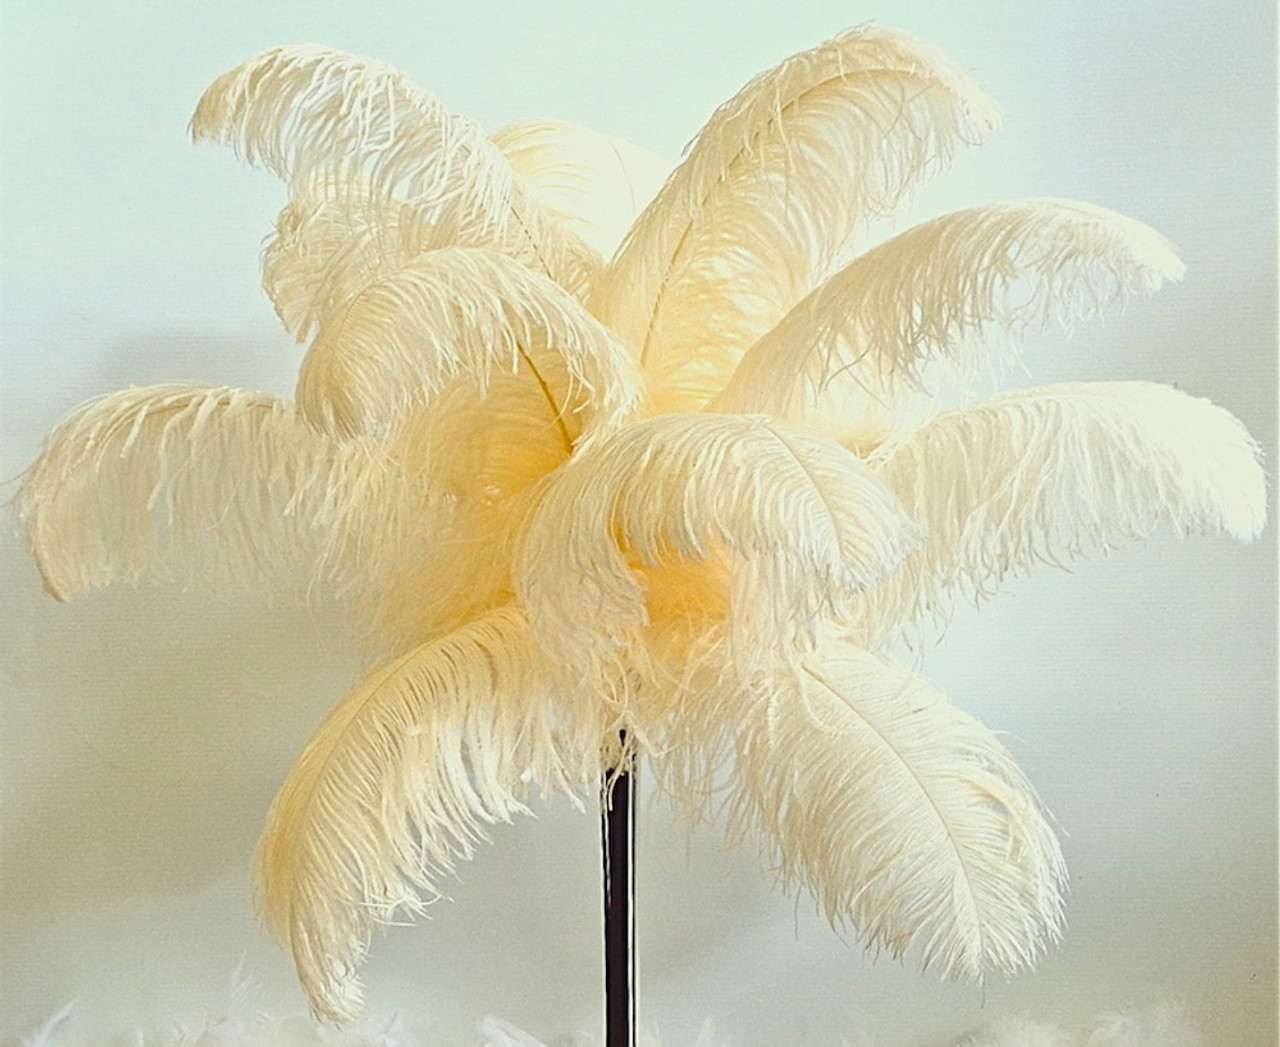 18 inch ostrich feathers